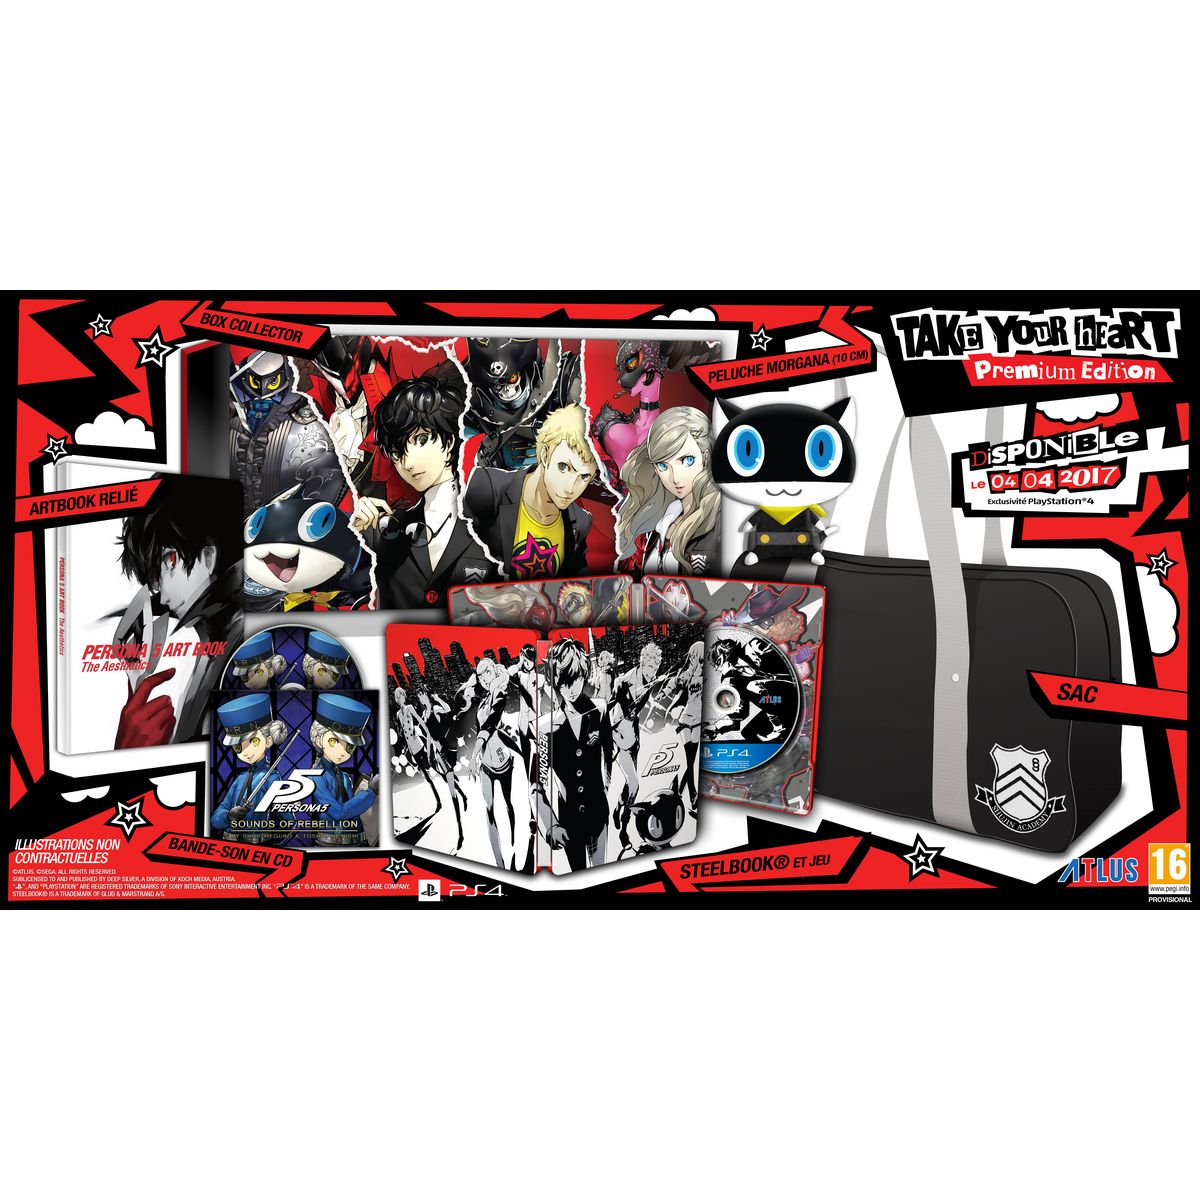 Persona 5 Édition Premium « Take Your Heart » PS4